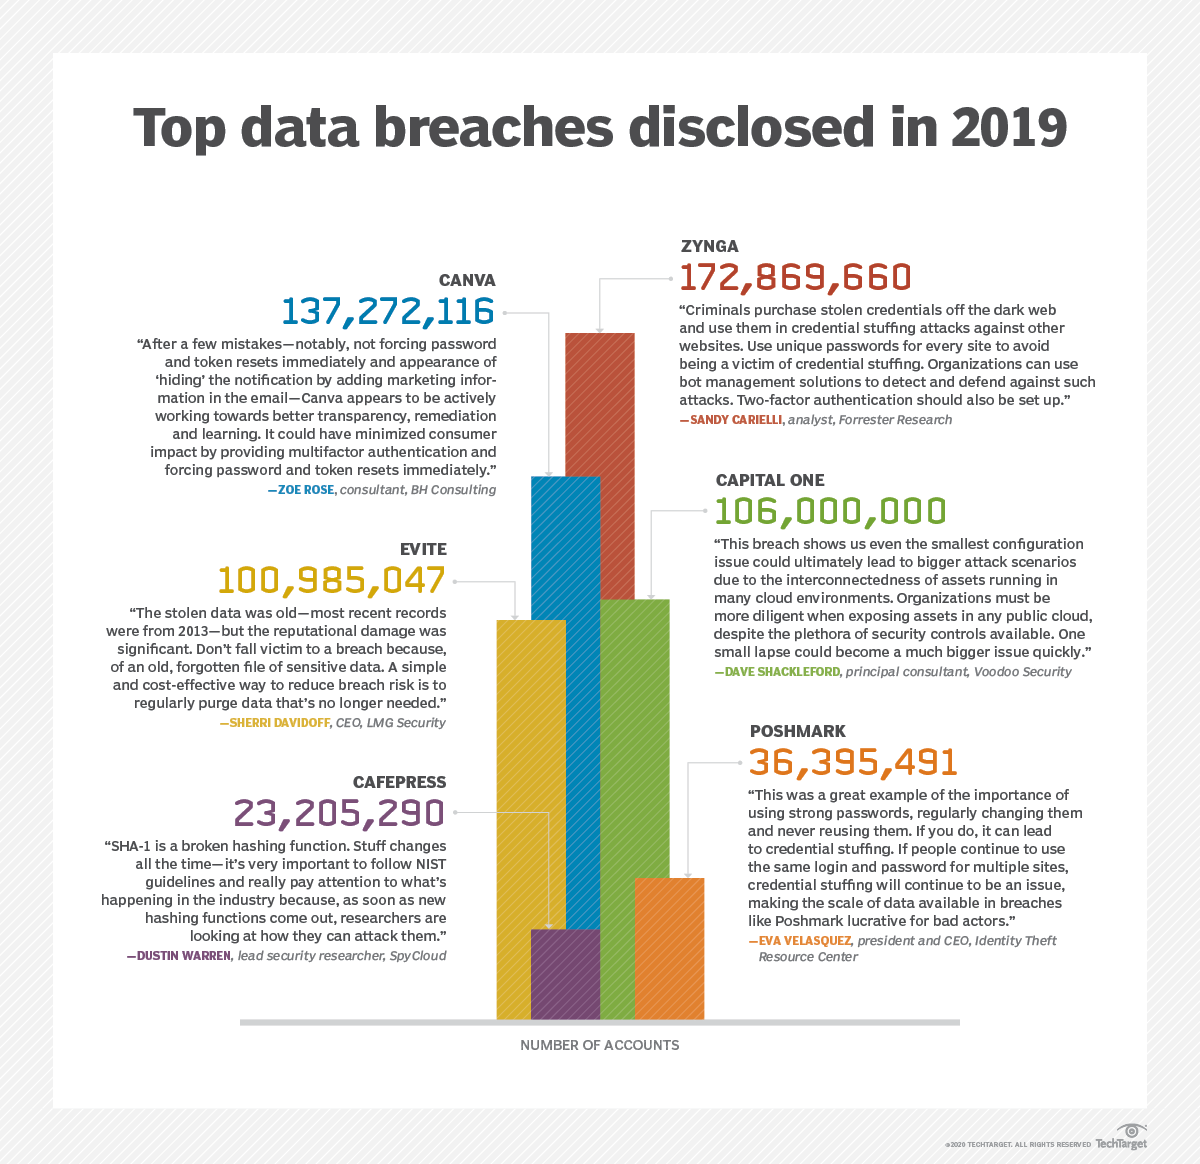 Analyzing The Top 2019 Data Breach Disclosures Hindsight In 2020